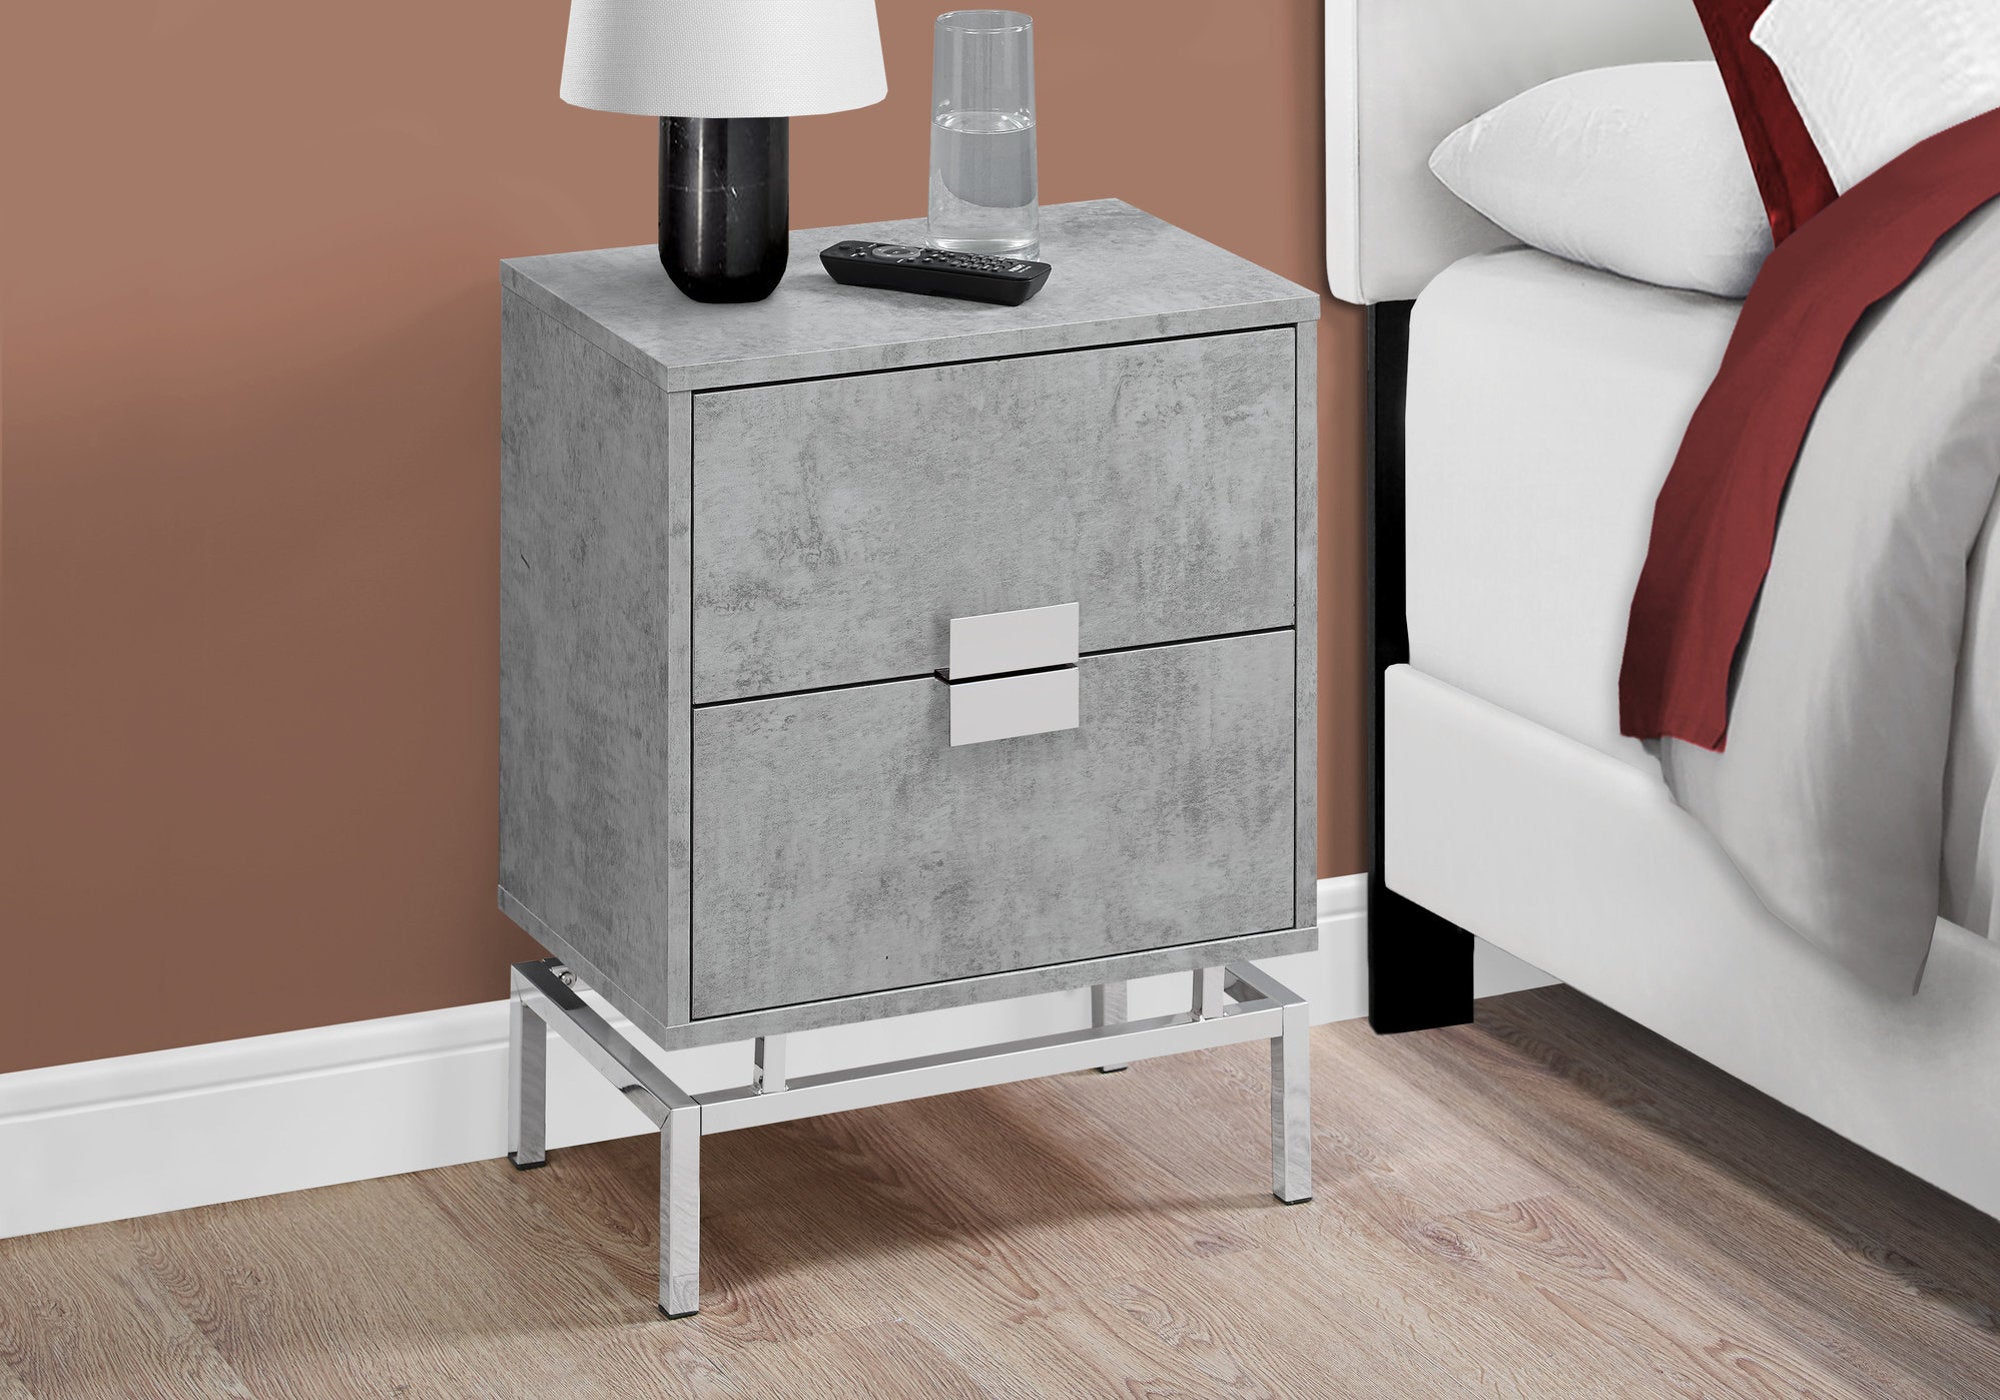 MN-943491    Accent Table, Side, End, Nightstand, Lamp, Living Room, Bedroom, Metal Legs, Laminate, Grey Cement Look, Chrome, Contemporary, Modern